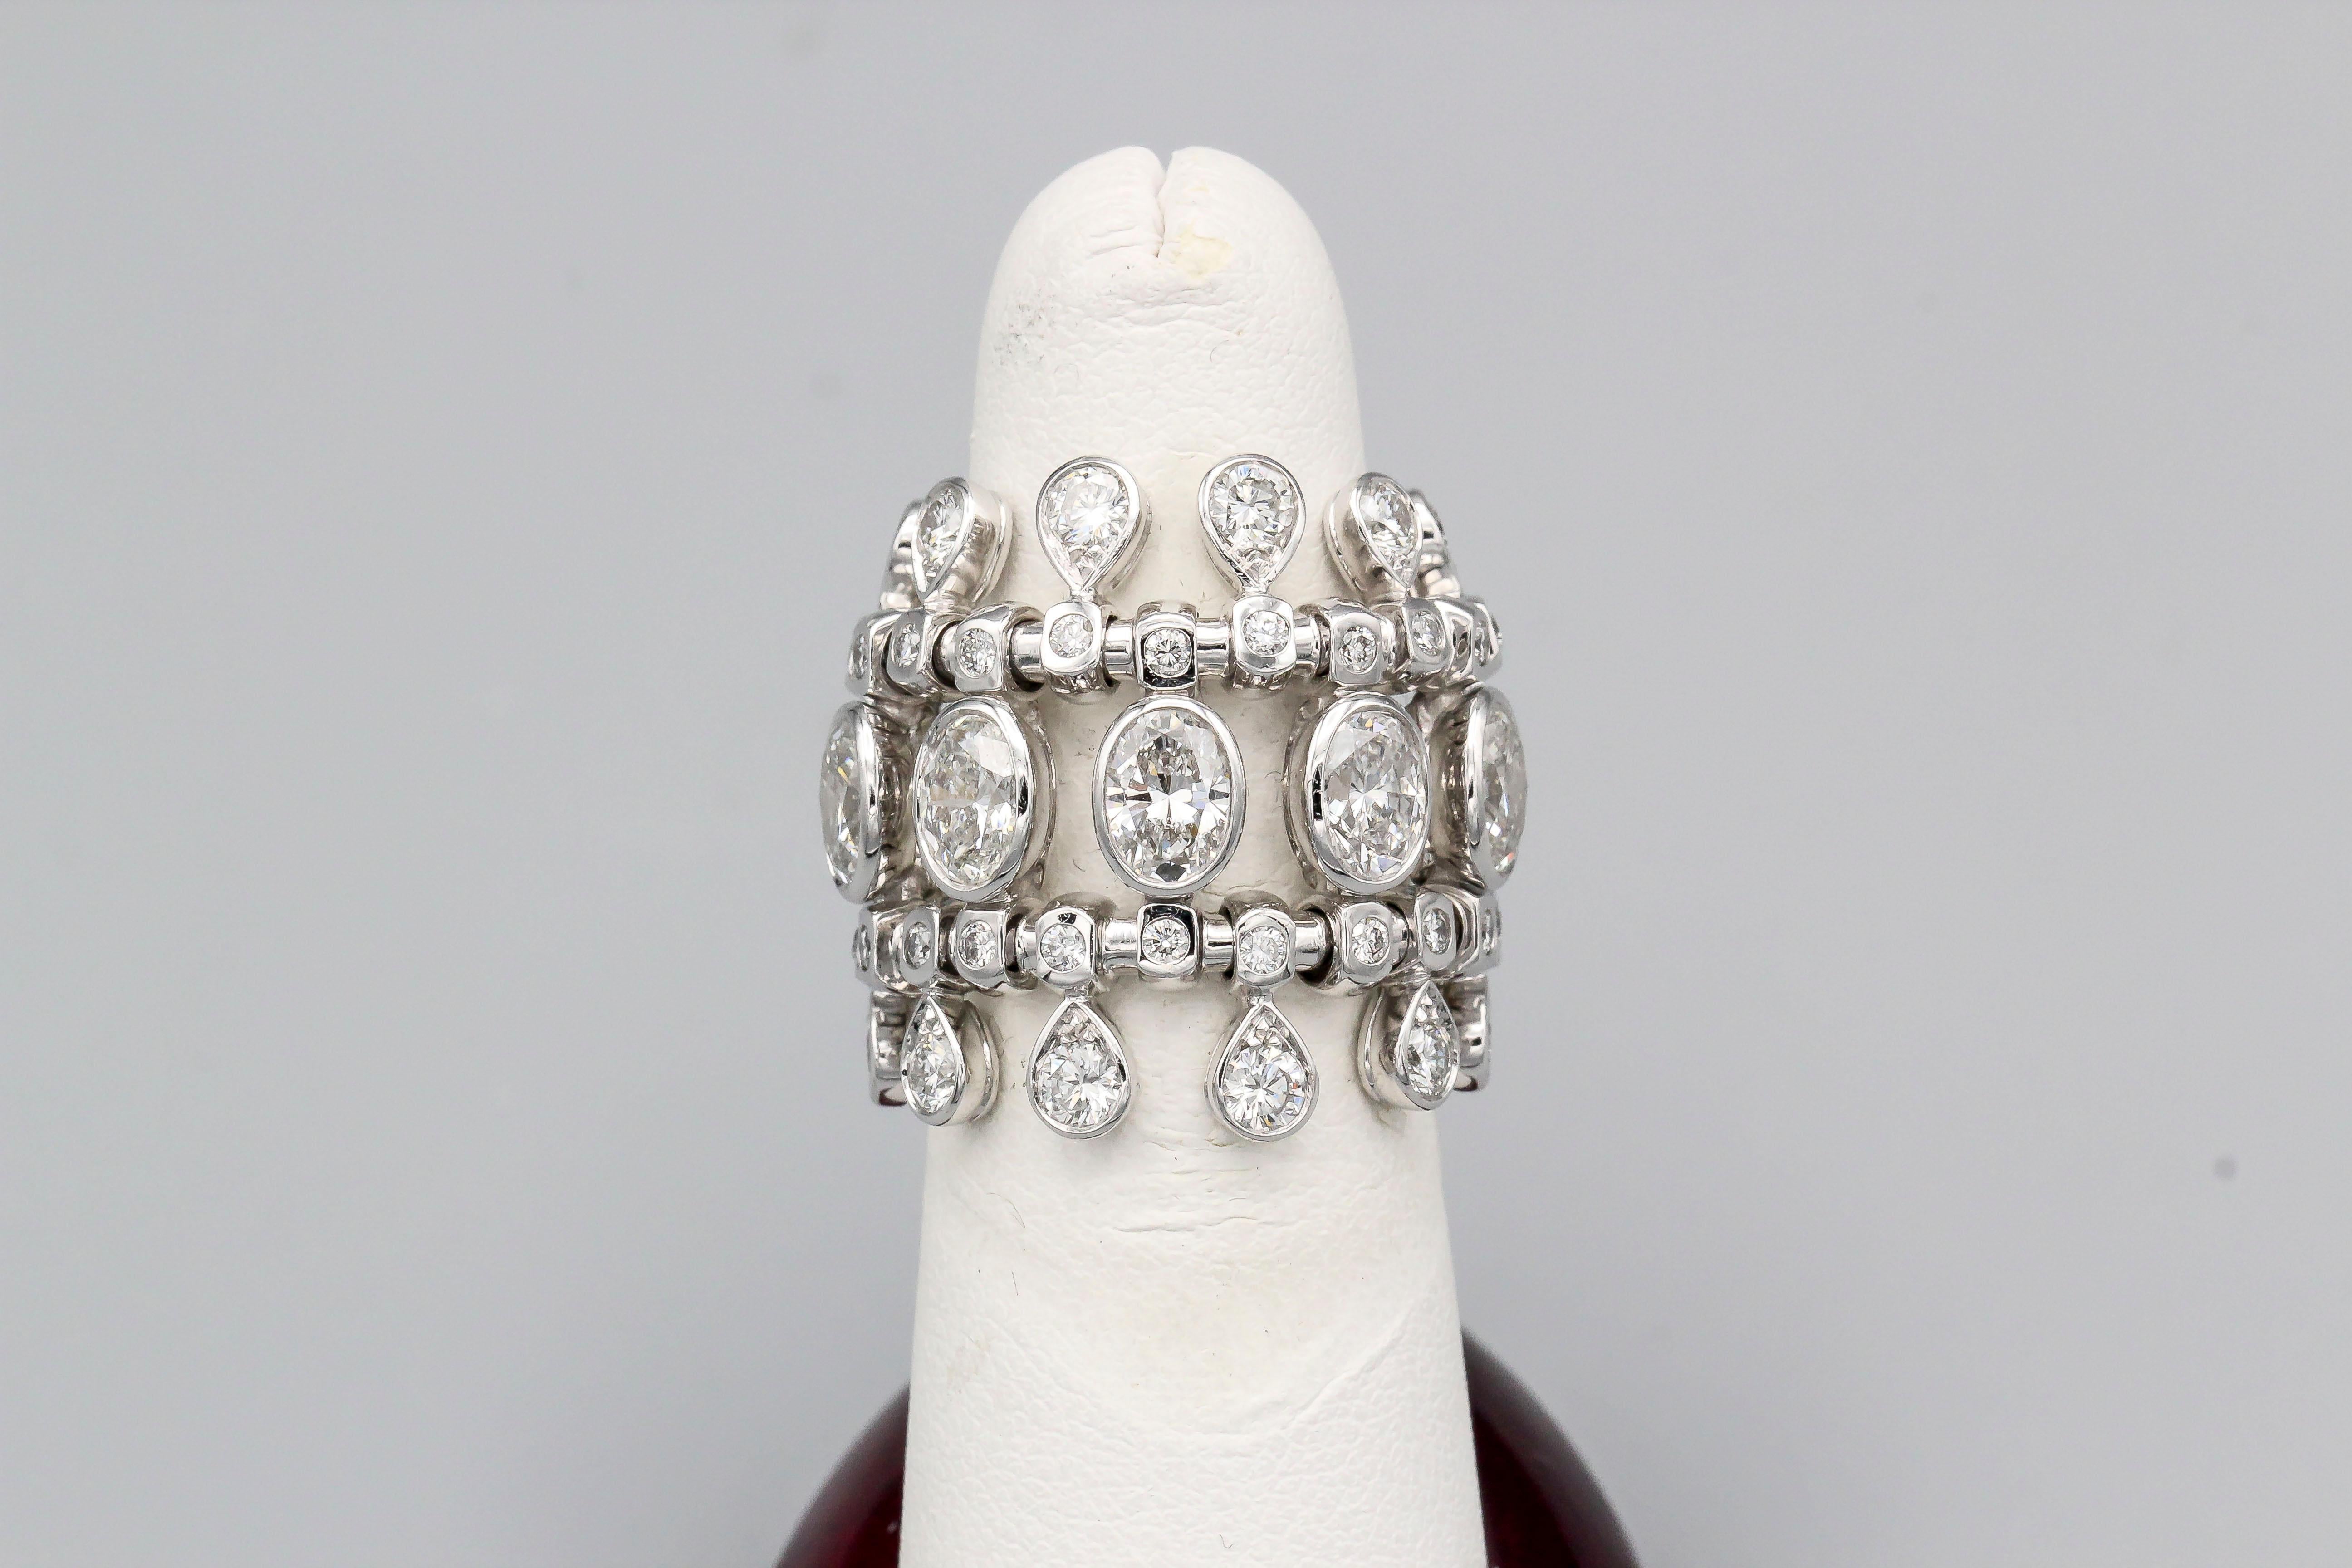 Elegant diamond and 18K white gold fringe ring by Dior. It features high grade oval and round brilliant cut diamonds, approx. 5.0-6.0cts total weight. European size 52, US size 6. Original retail price of $89,000.

Hallmarks: Dior 750, reference